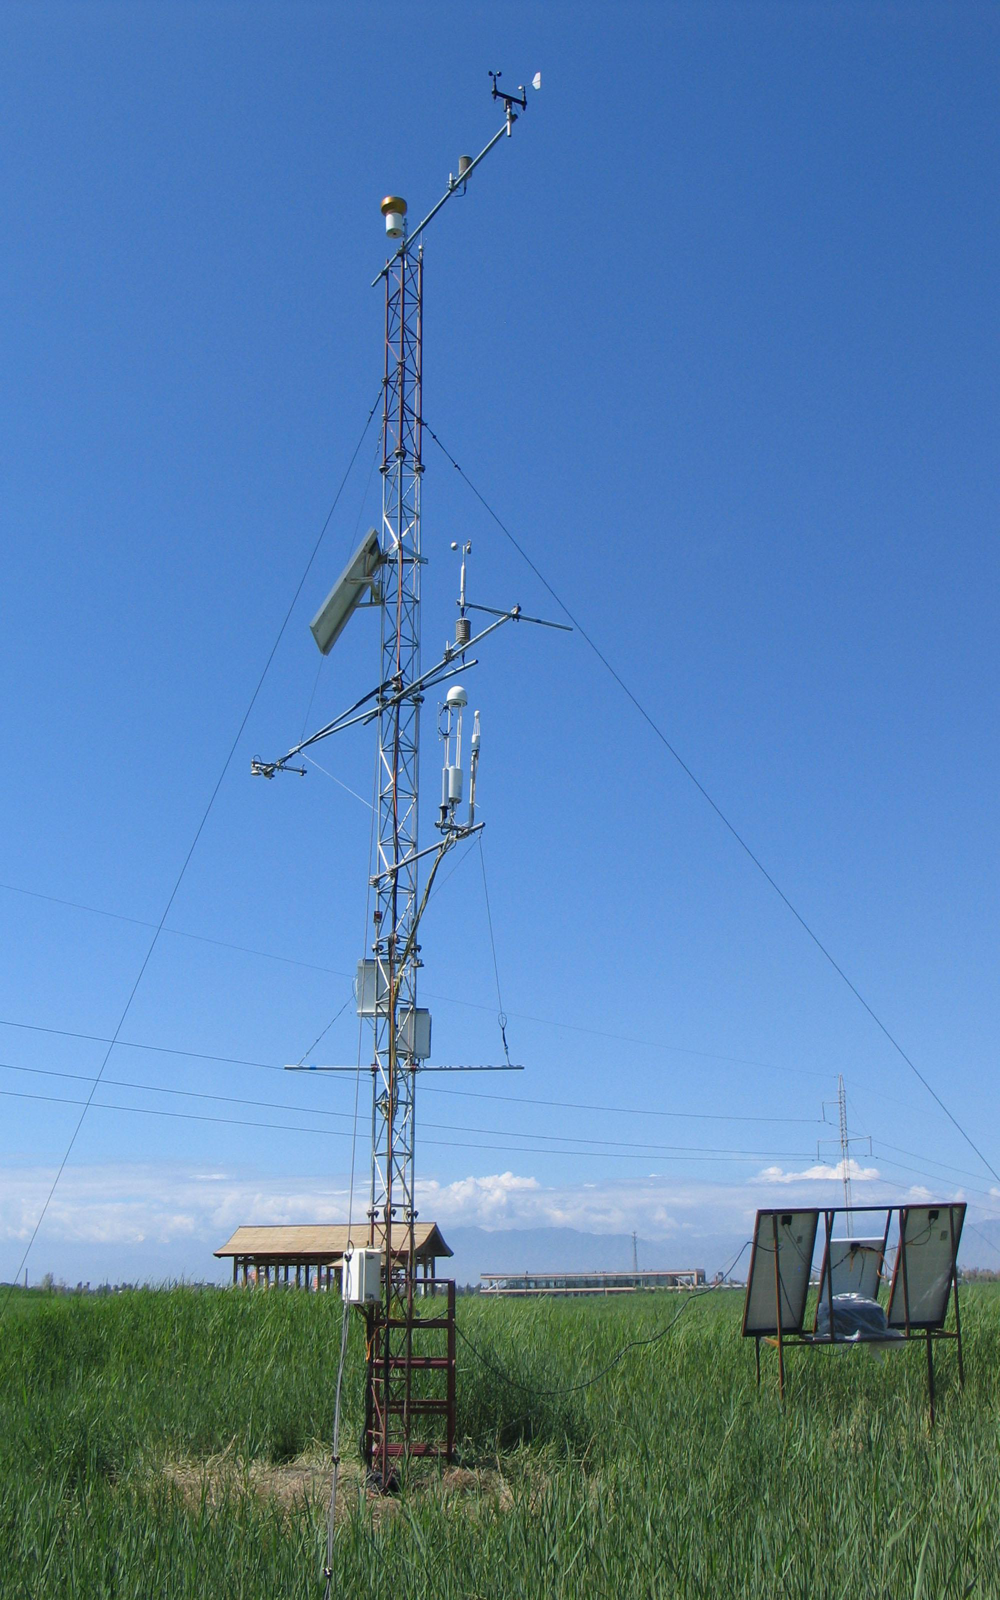 Qilian Mountains integrated observatory network: Dataset of Heihe integrated observatory network (eddy covariance system of Zhangye wetland station, 2020)